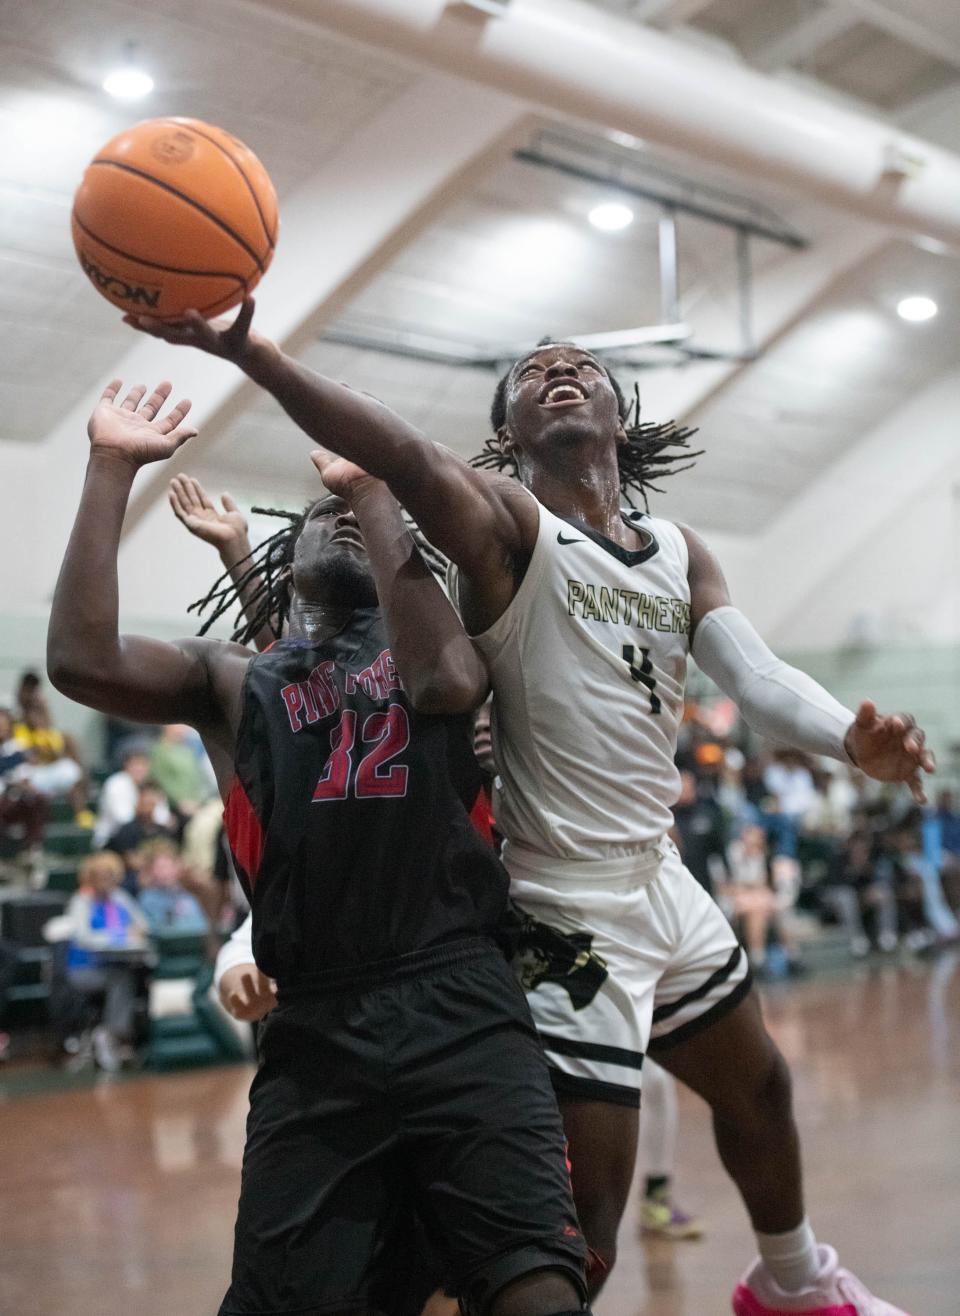 Treymar Jones (4) shoots over Marlin Williams (32) during the Pine Forest vs Milton high school basketball game in the Esca-Rosa Challenge at Pensacola Catholic High School on Tuesday, Nov. 21, 2023.